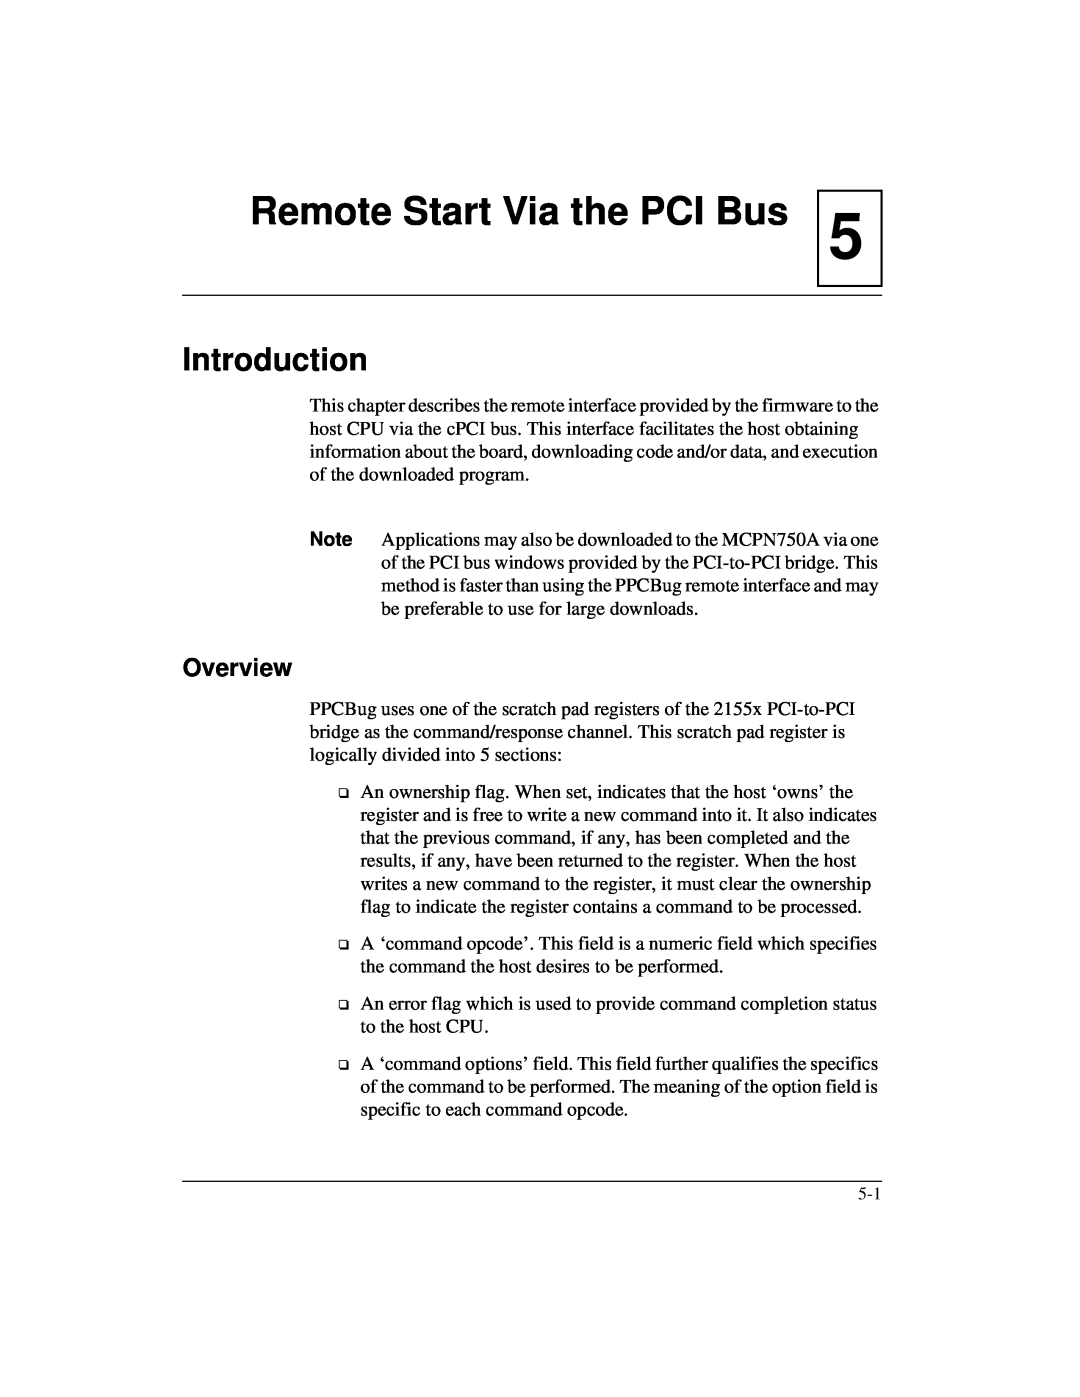 Motorola IH5, MCPN750A manual Remote Start Via the PCI Bus, Overview, Introduction 